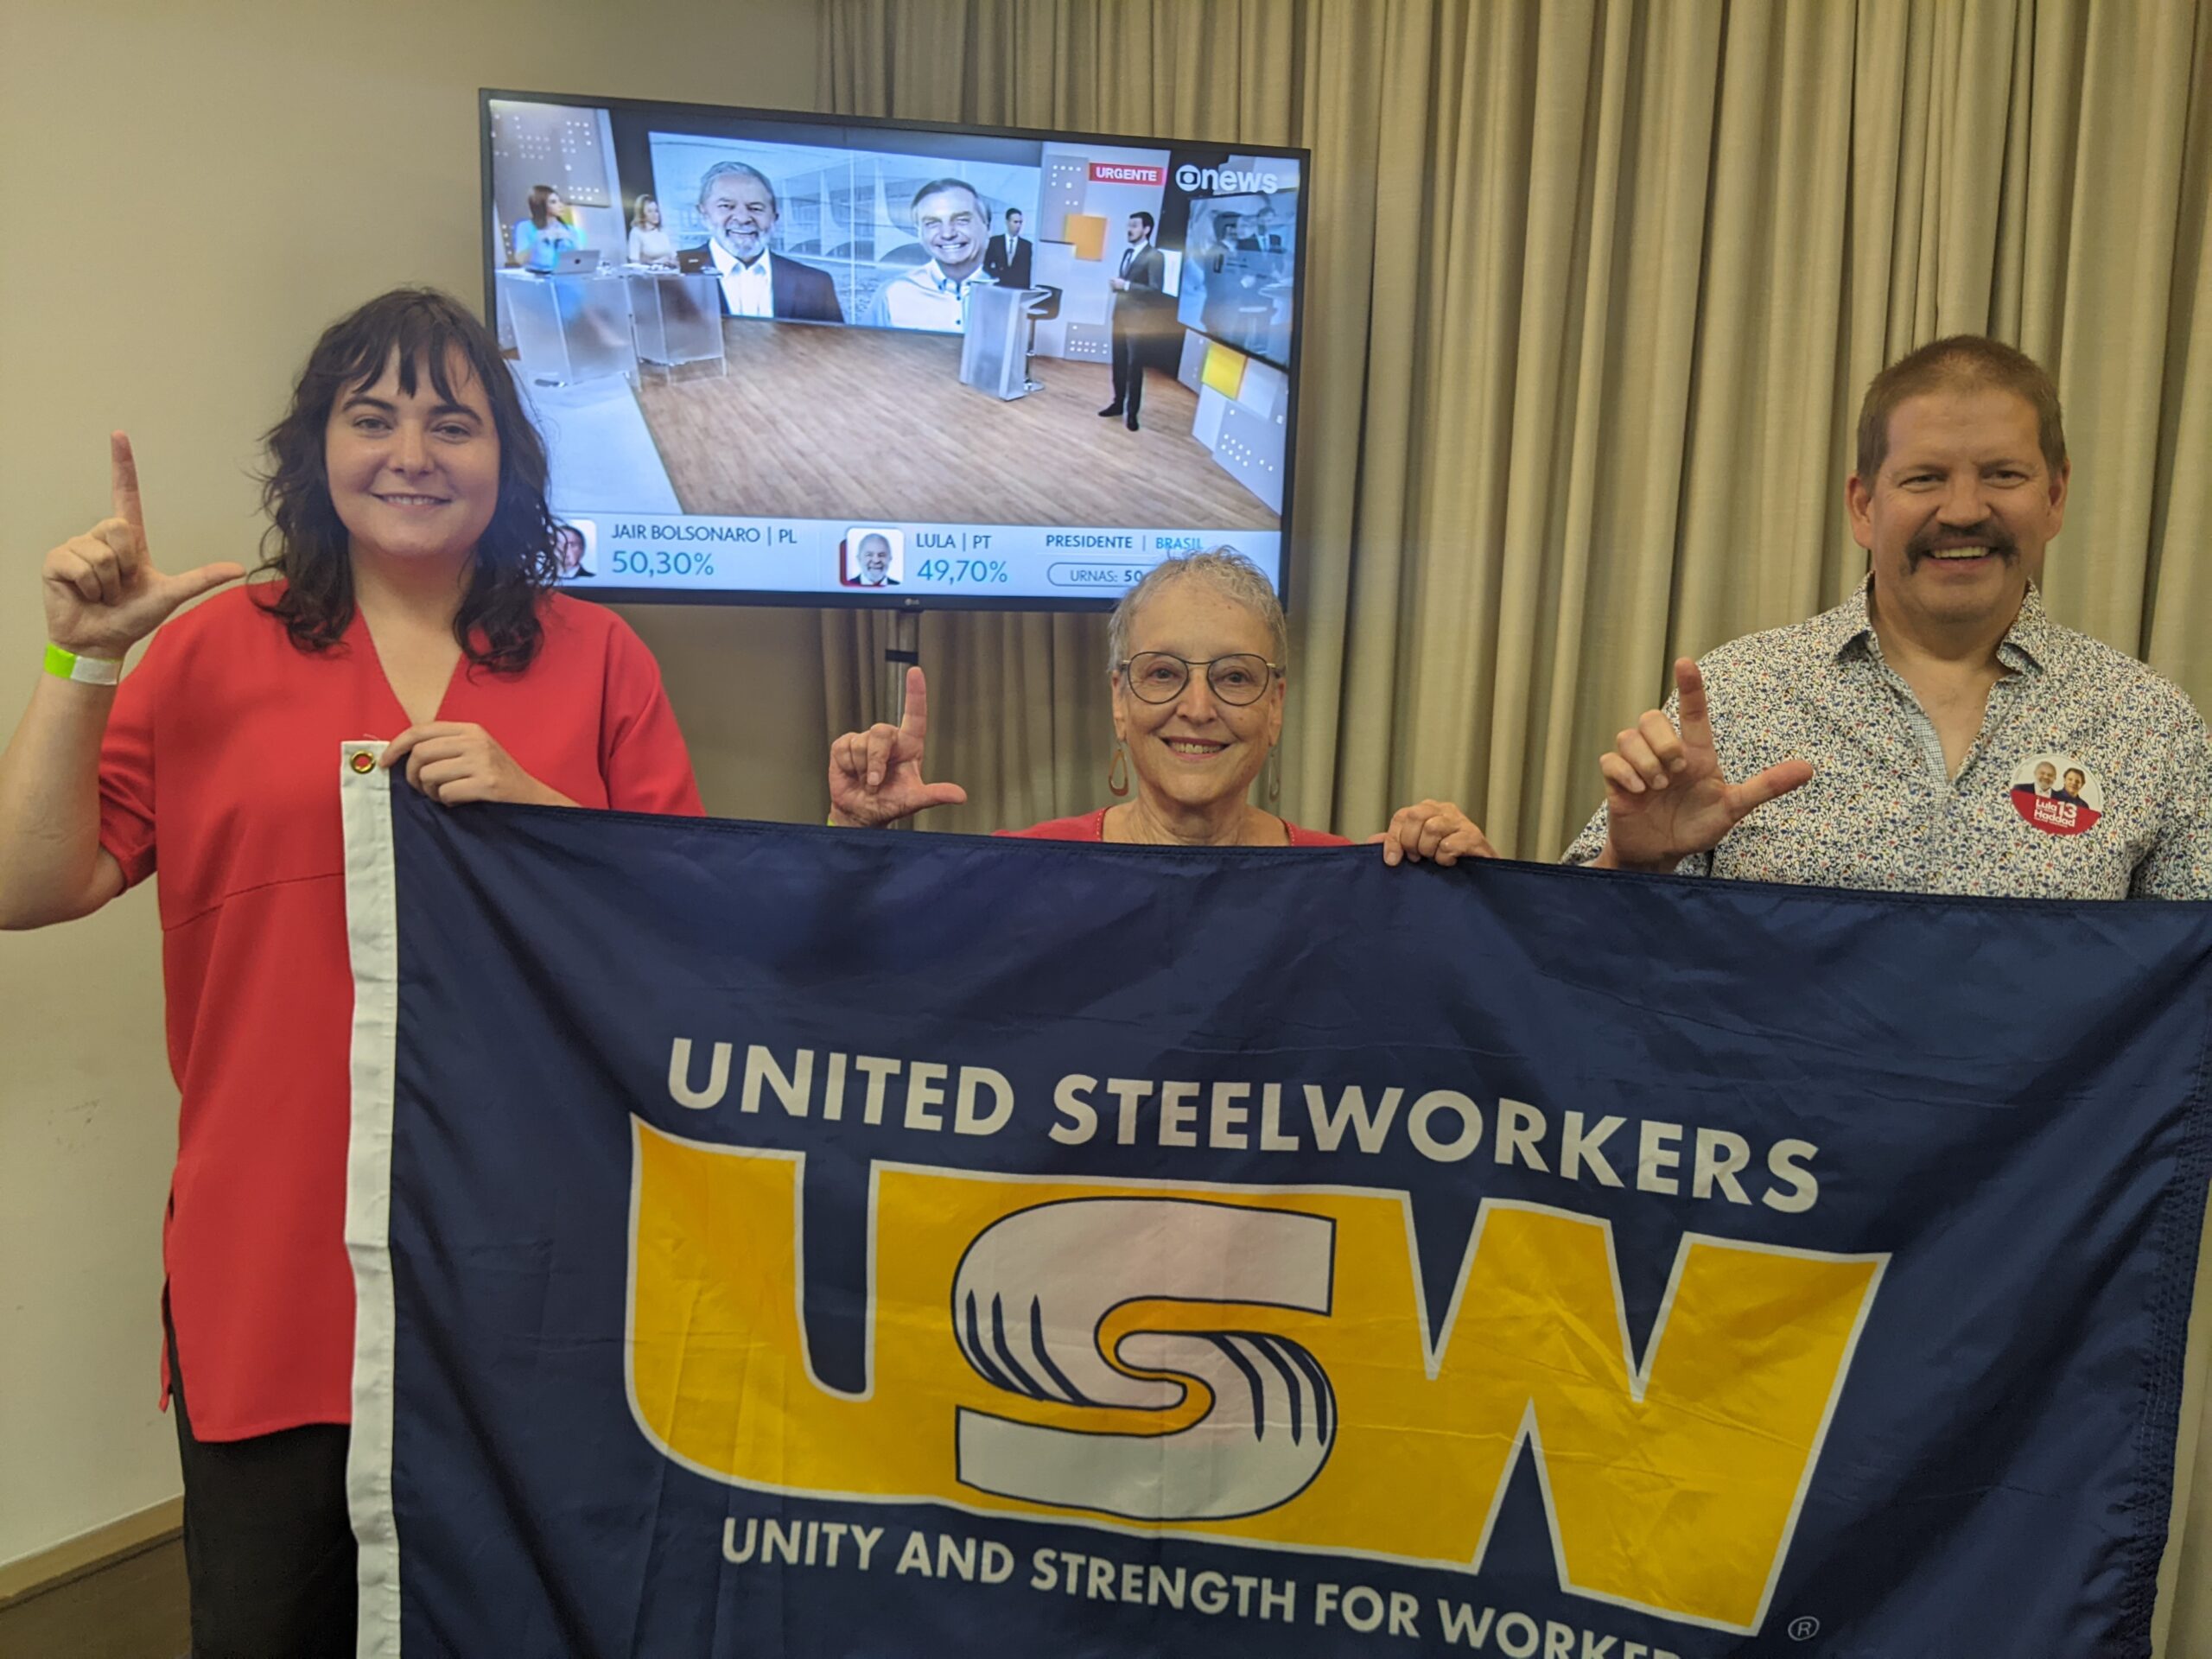 Three people standing, holding a blue United Steelworkers flag